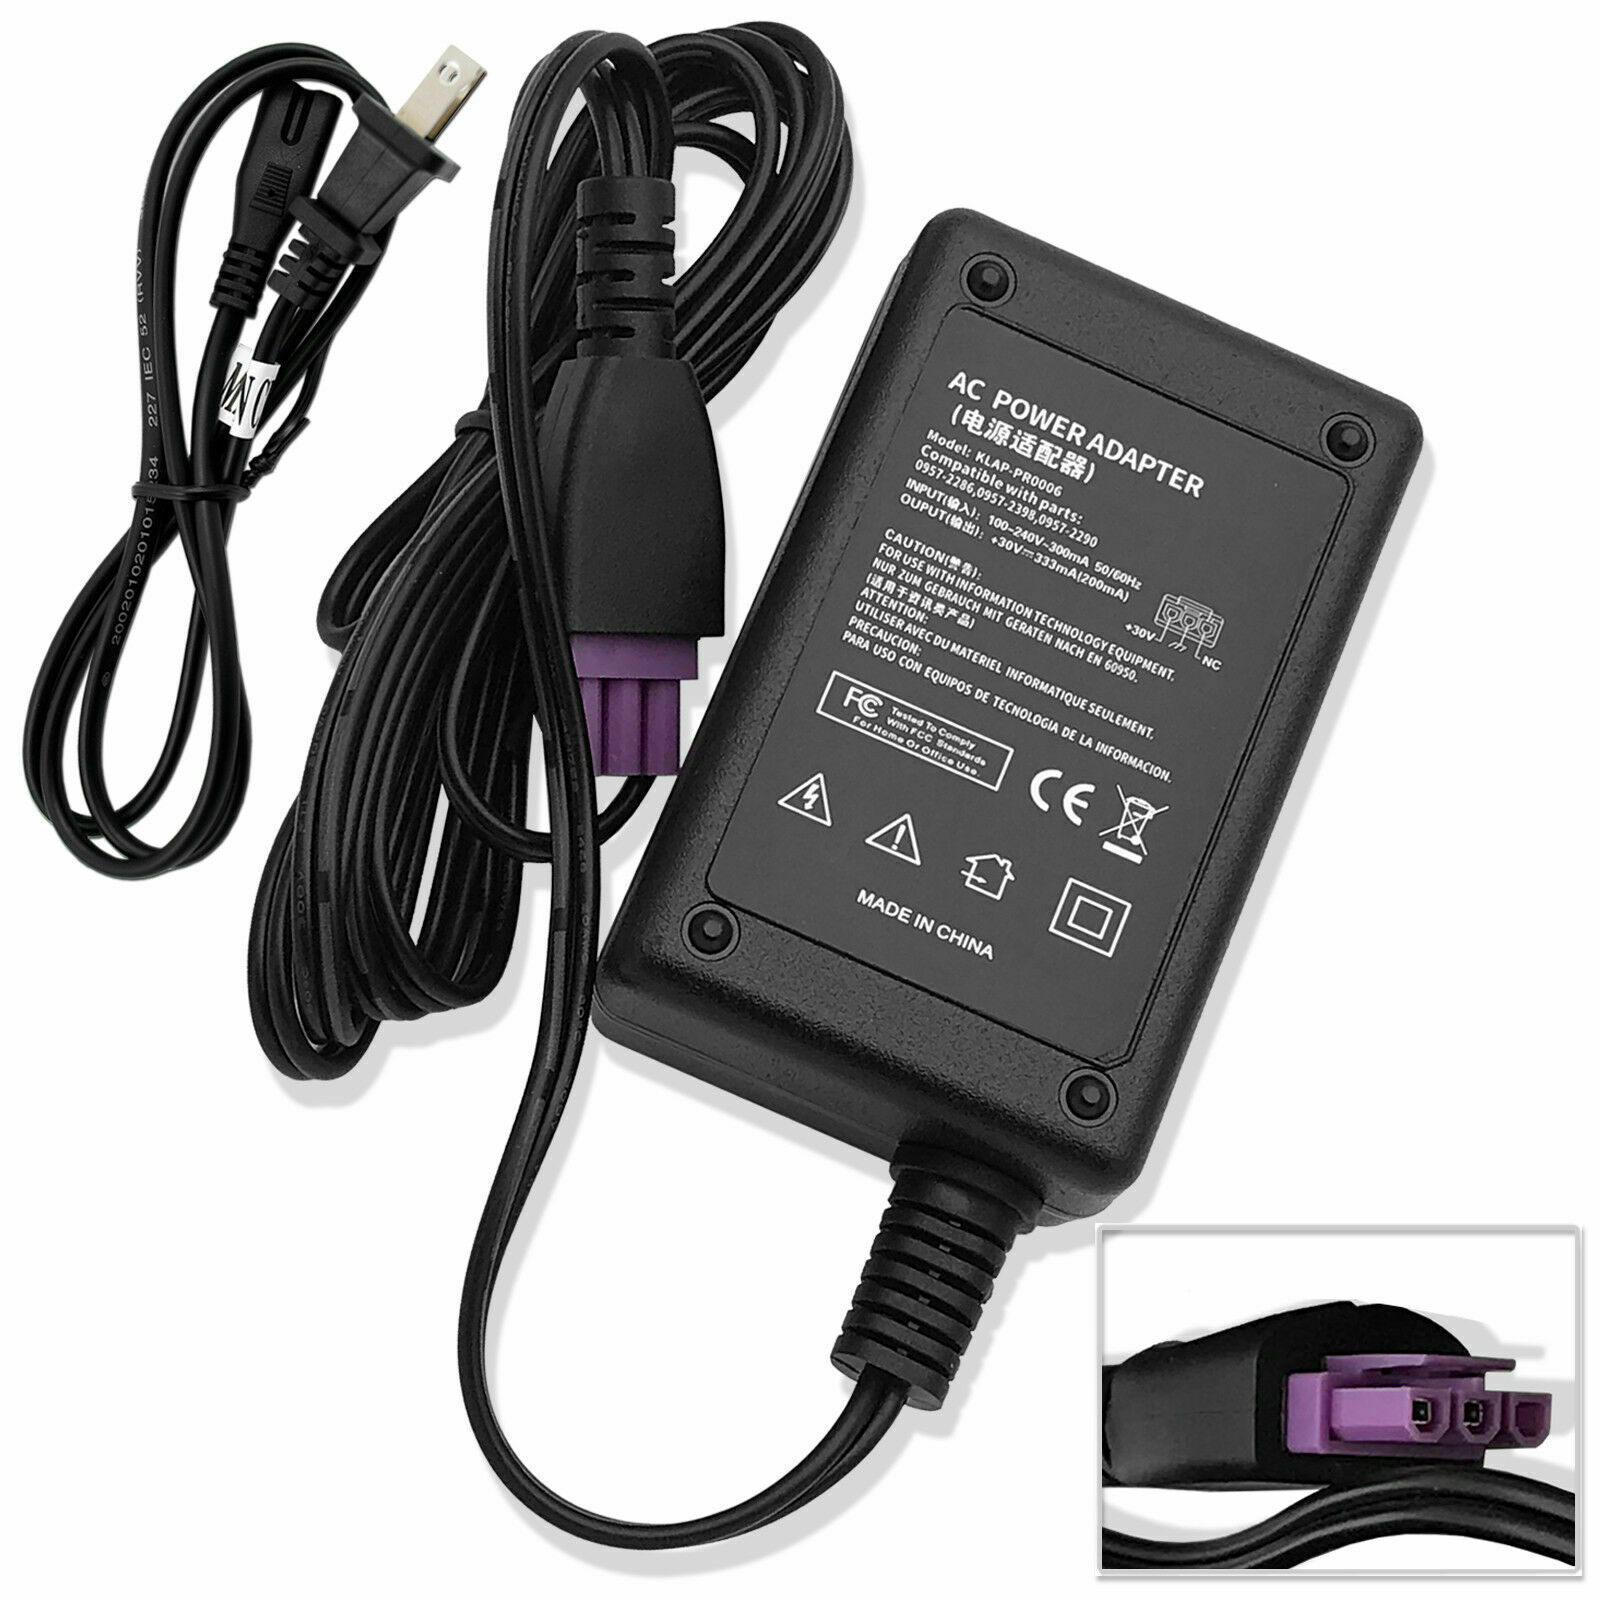 New AC Adapter Charger Power Cord For HP Deskjet 3051A 3052A 3054 3055A Printer Compatible Brand: For HP Type: AC Ada